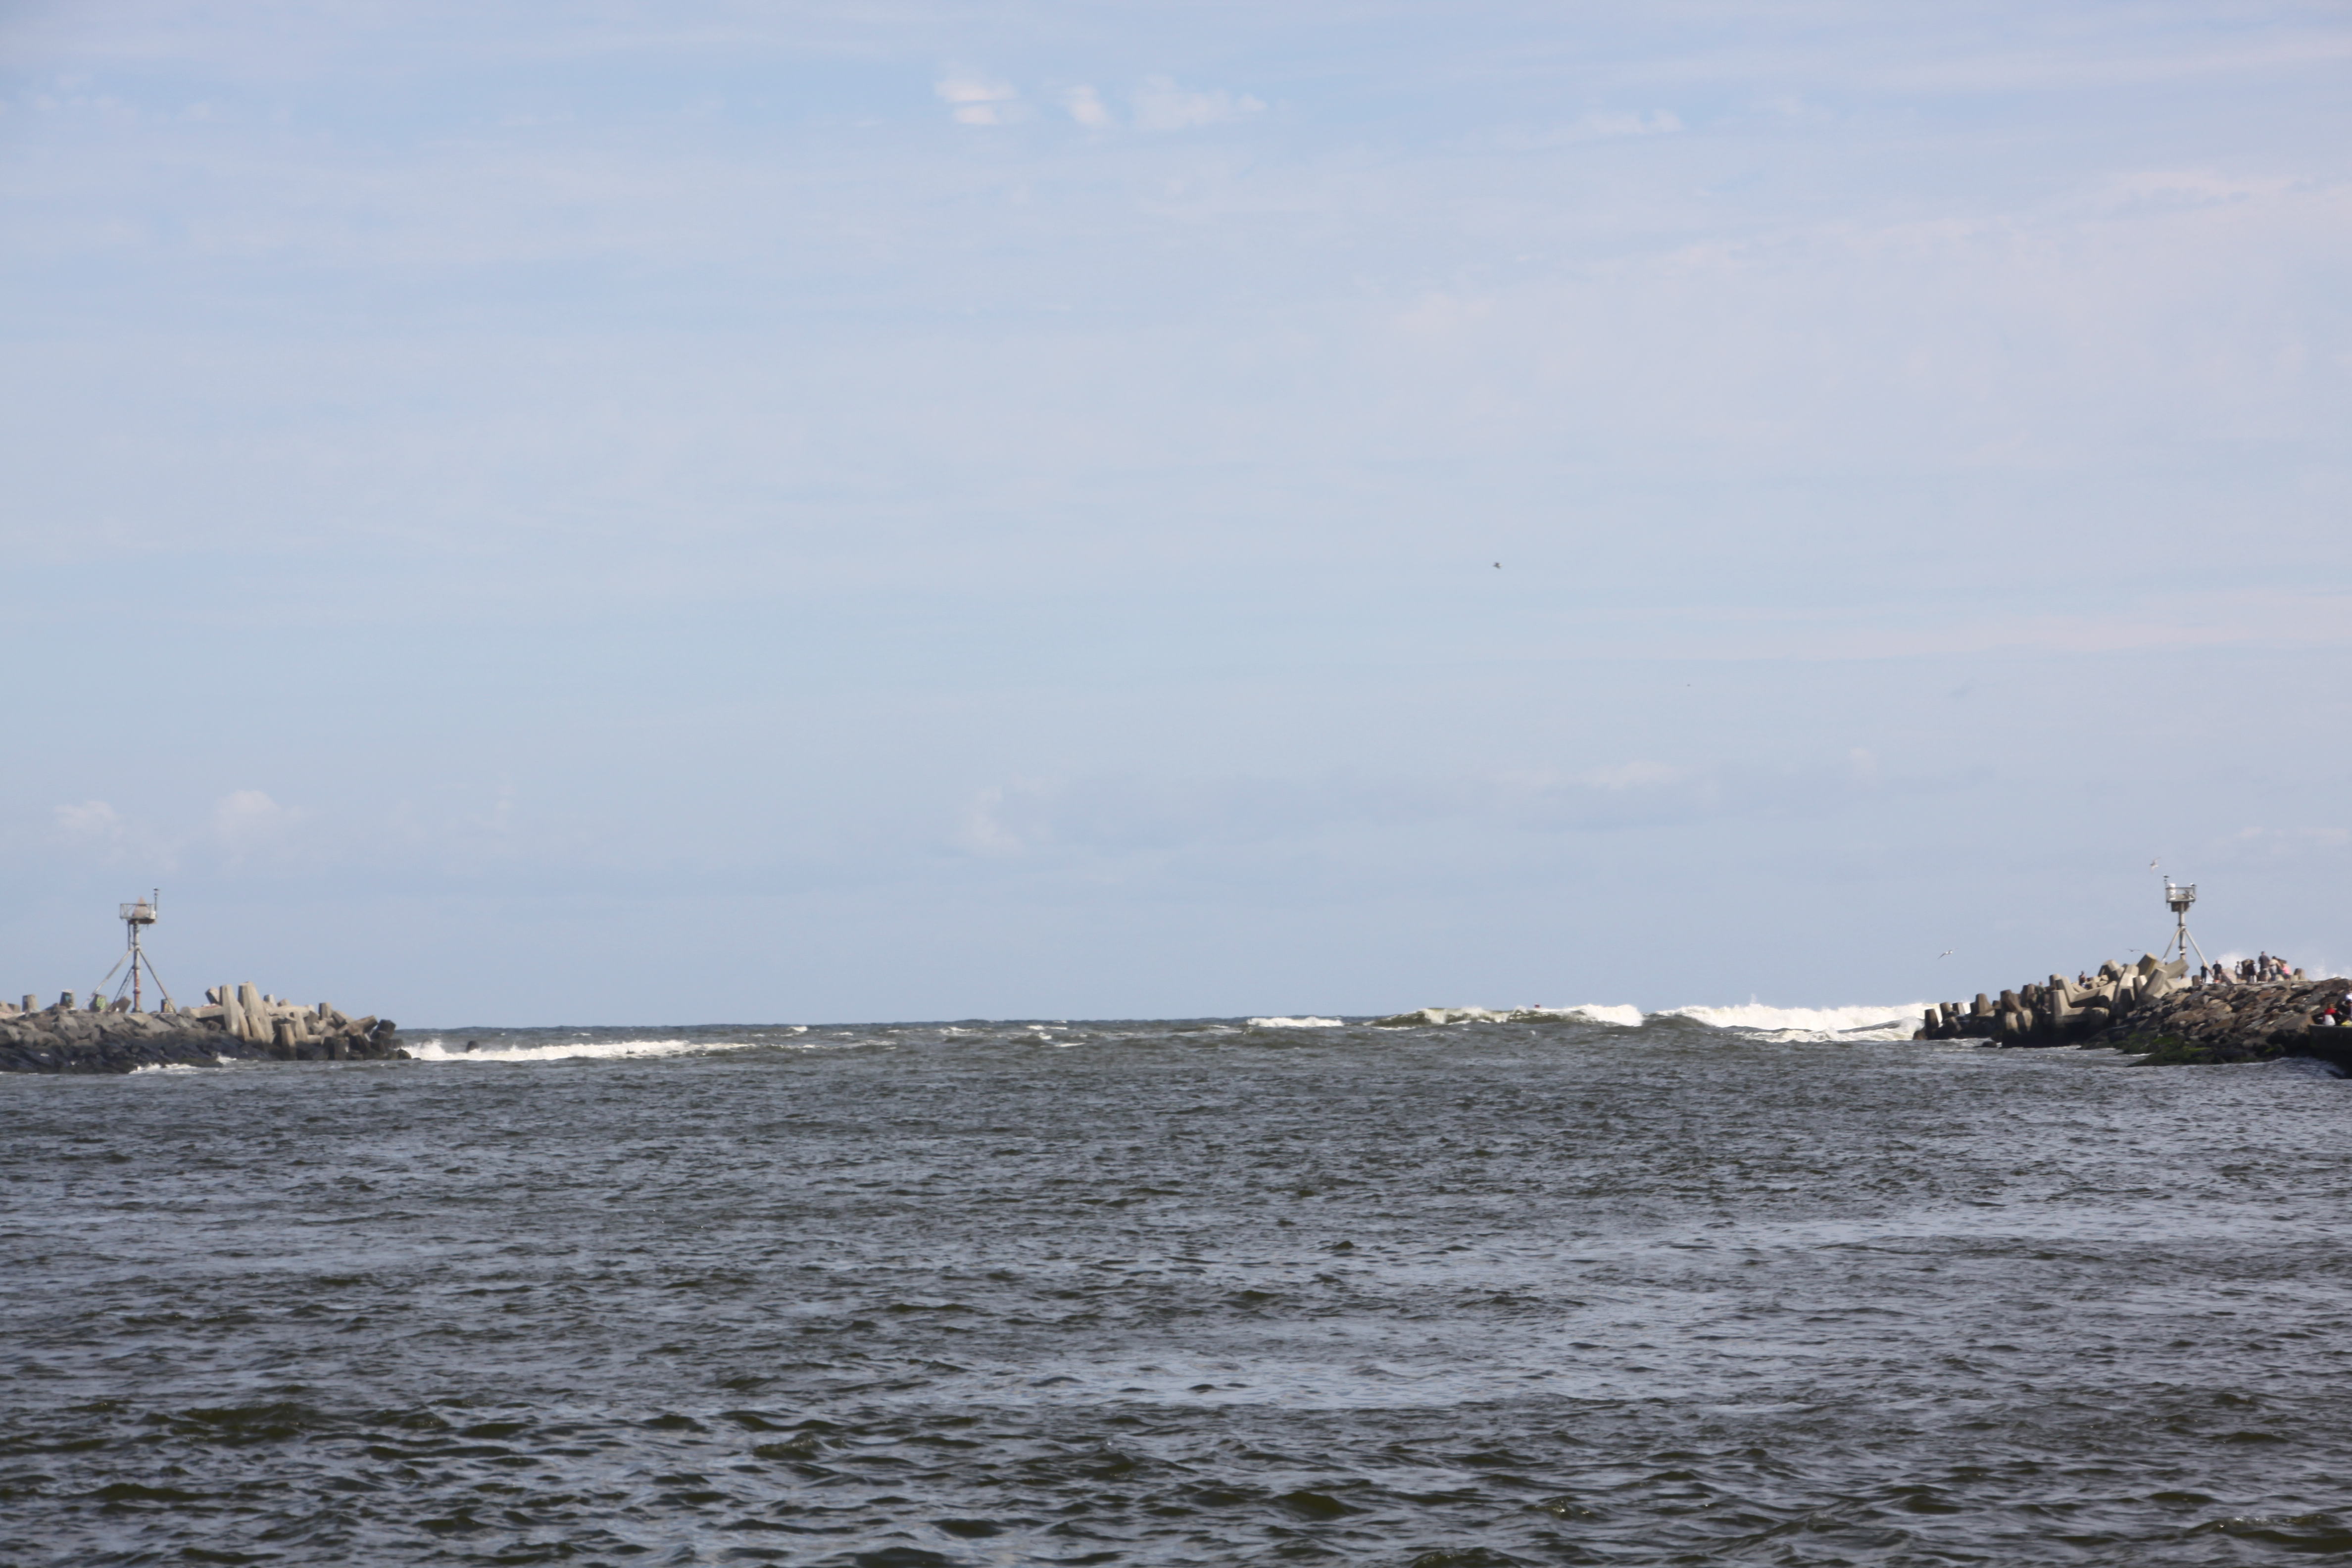 Surf breaking in the Manasquan Inlet.